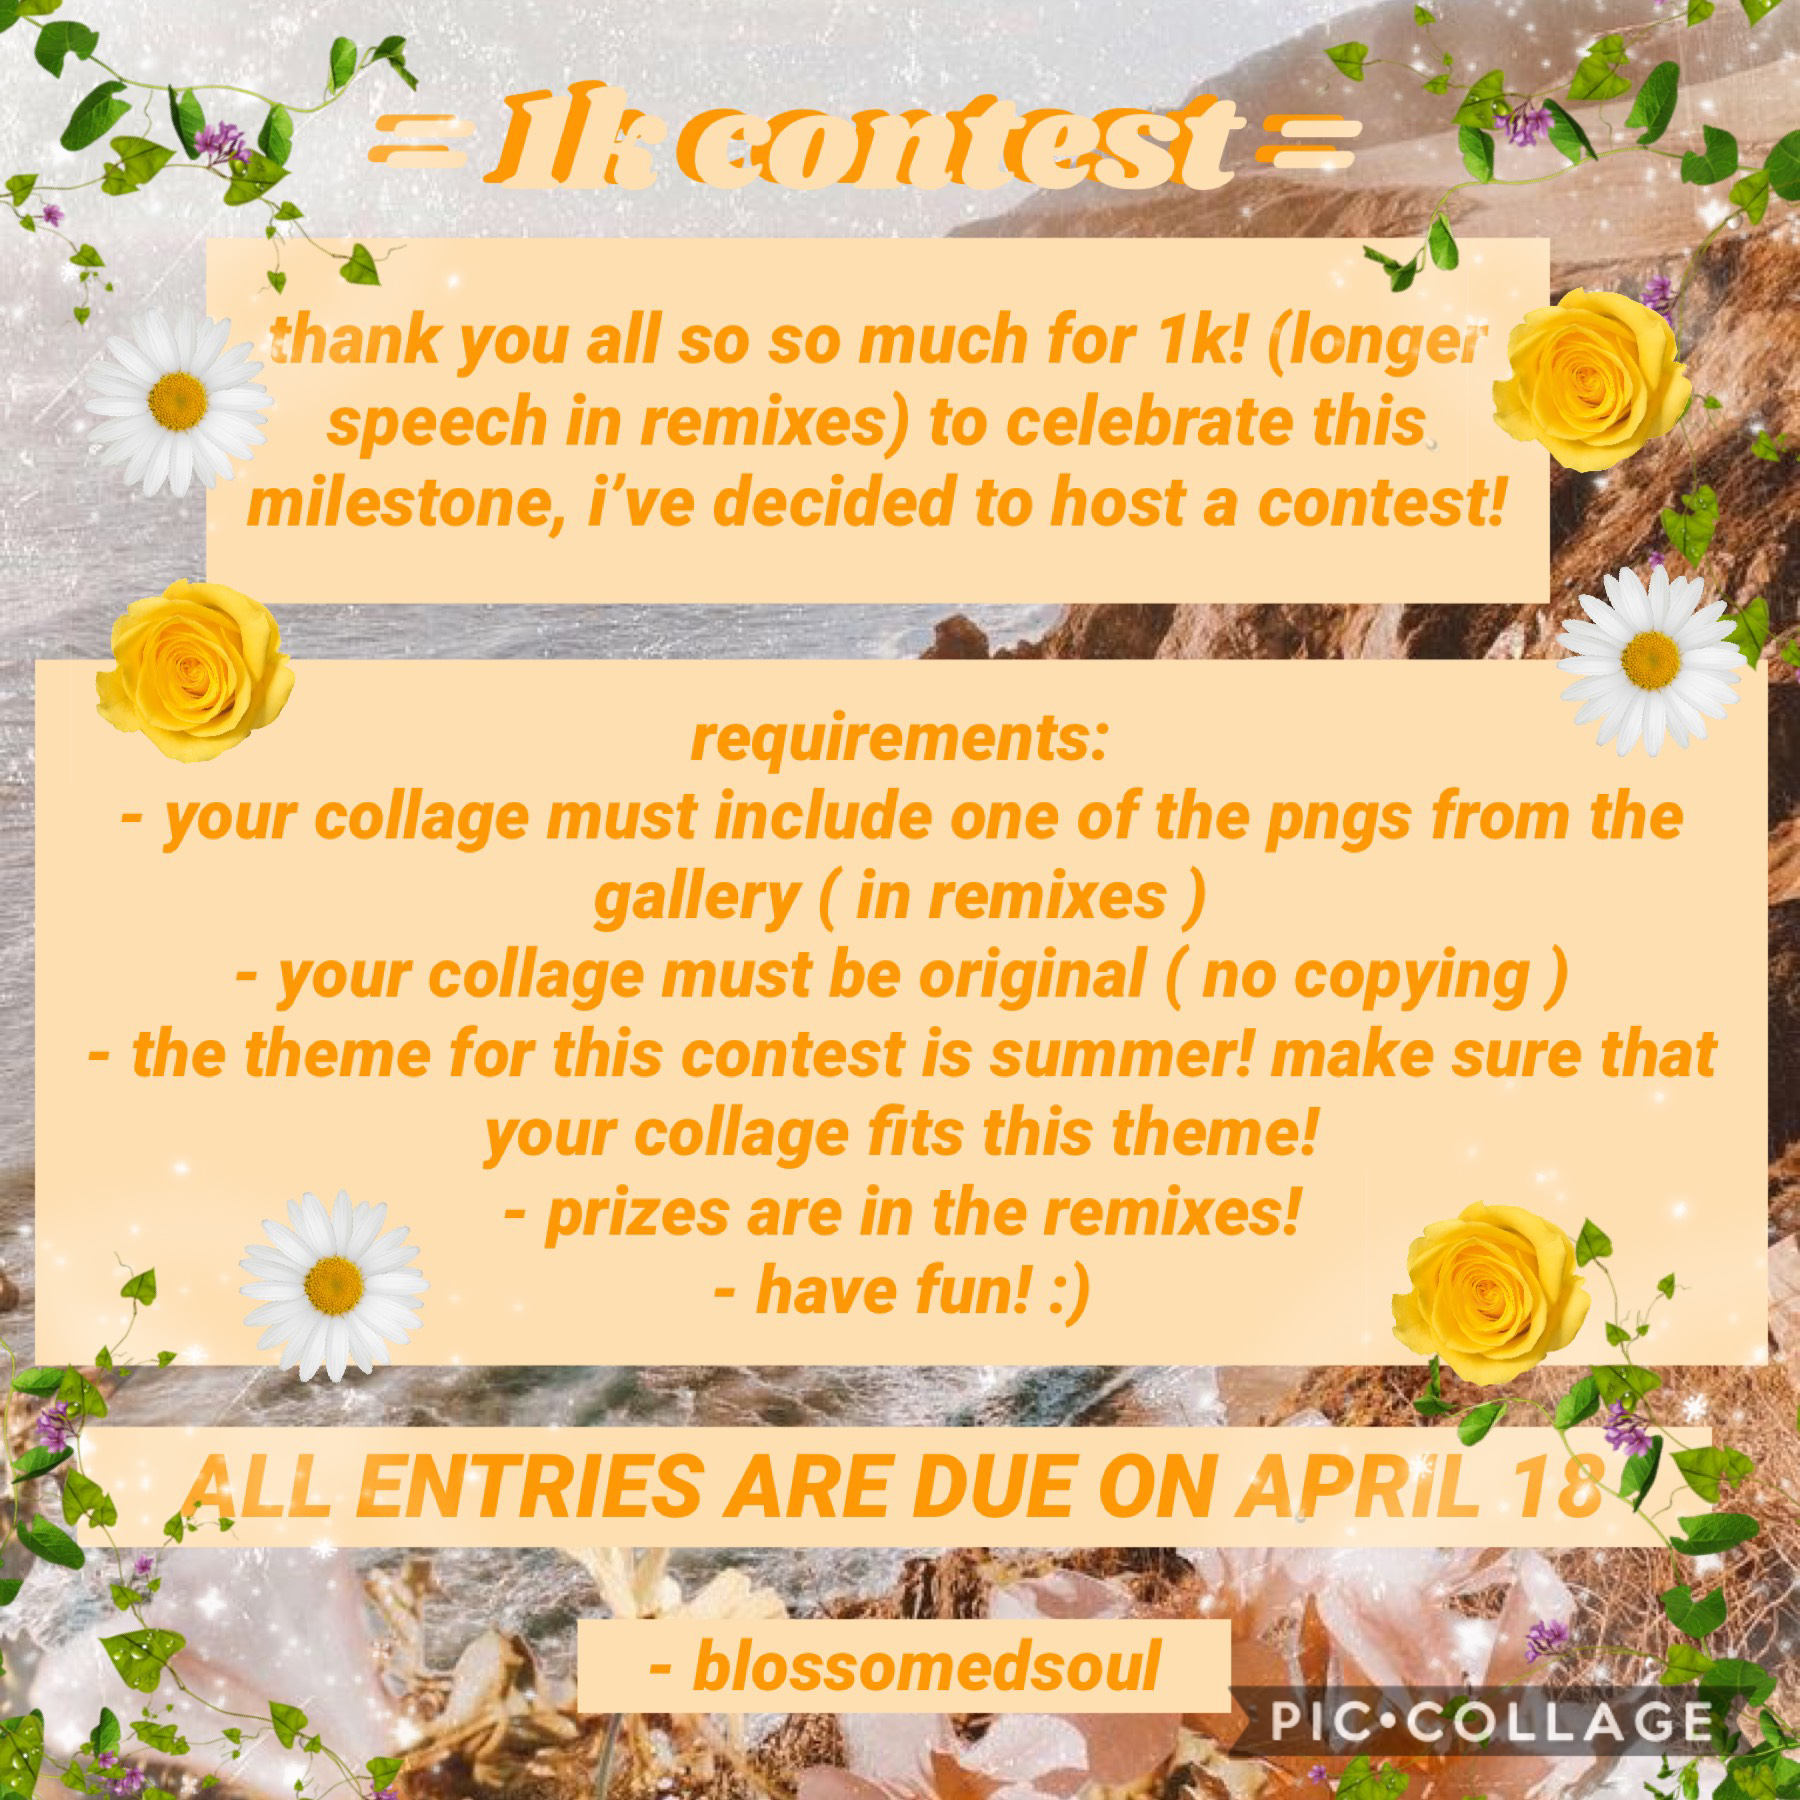 [ t a p ] 

please enter and spread the word! just wanted to do something to appreciate you all :)